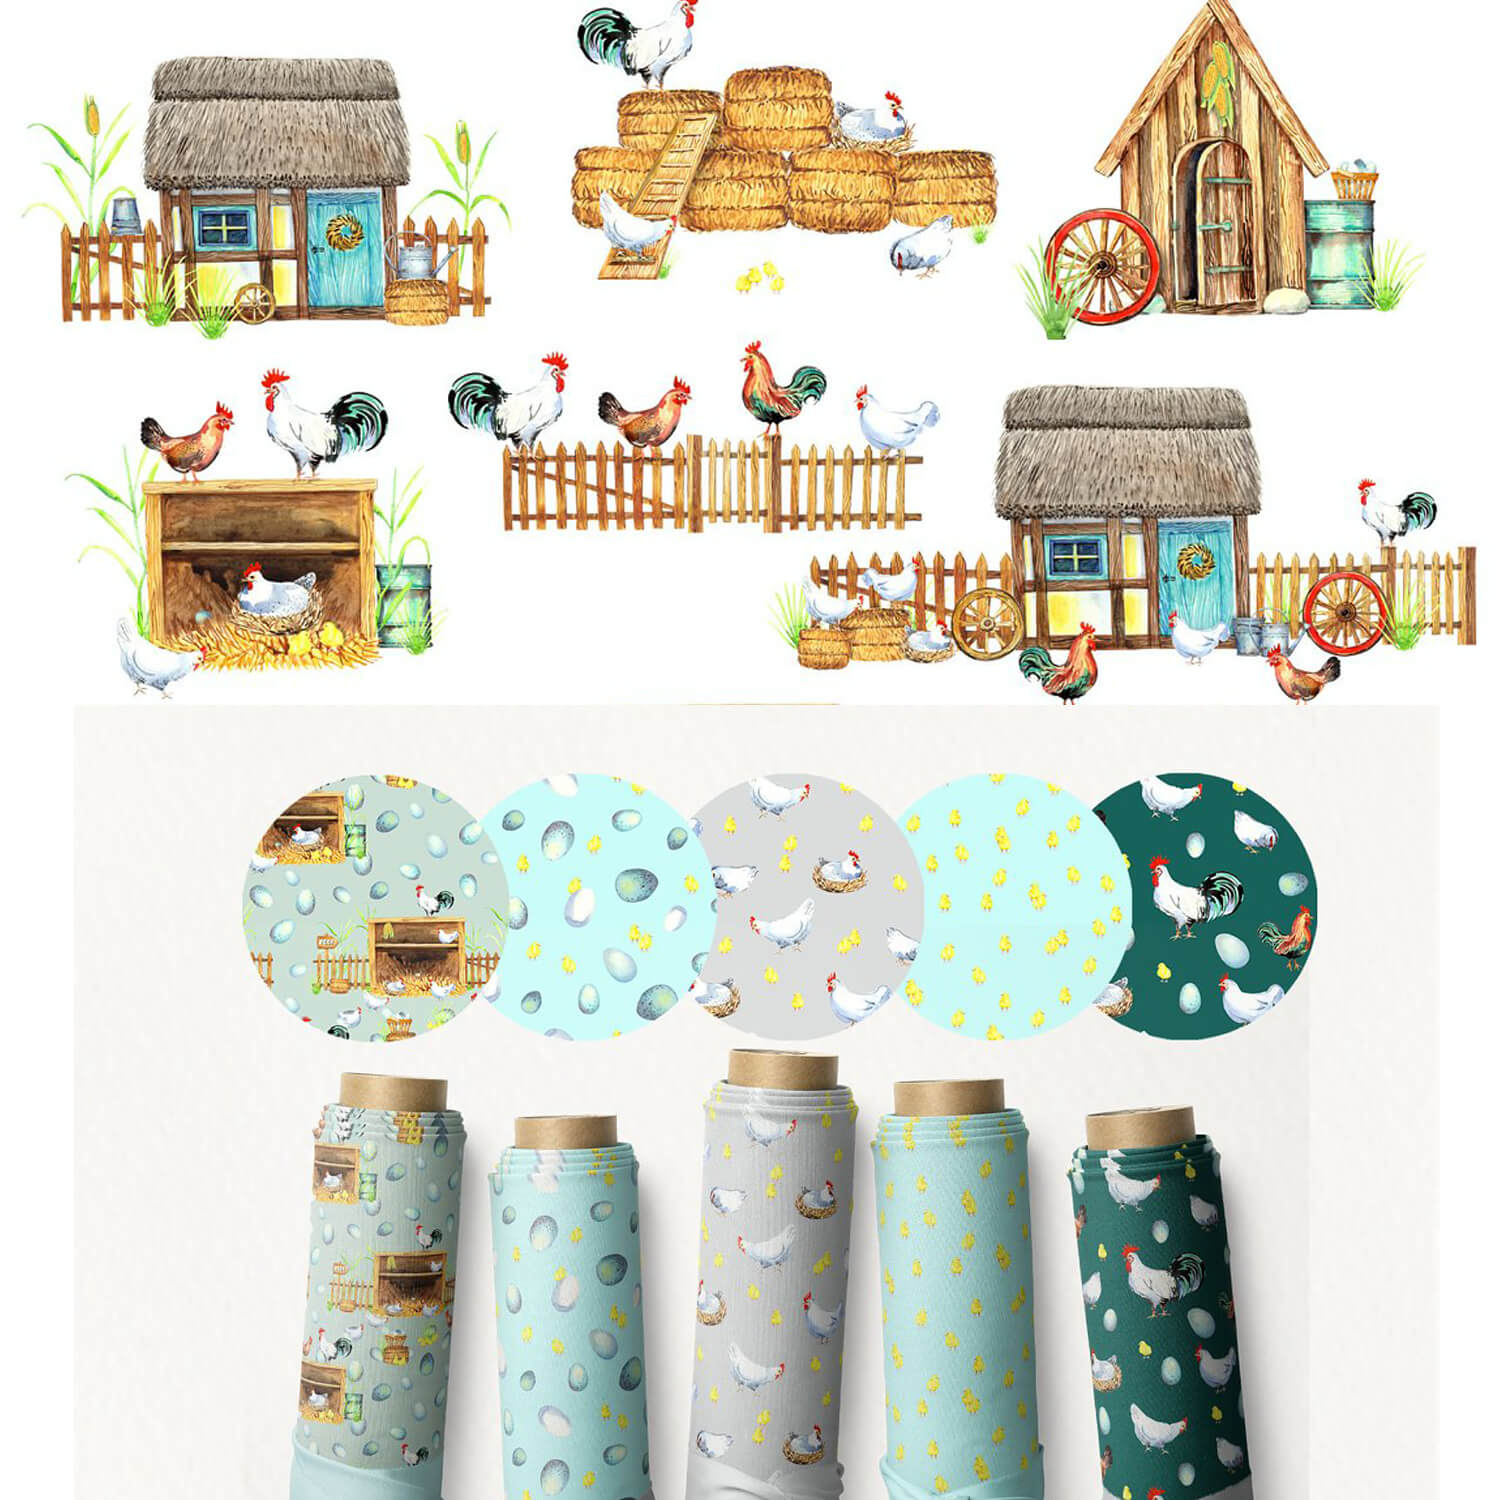 Fabrics depicting happy chickens on different backgrounds.